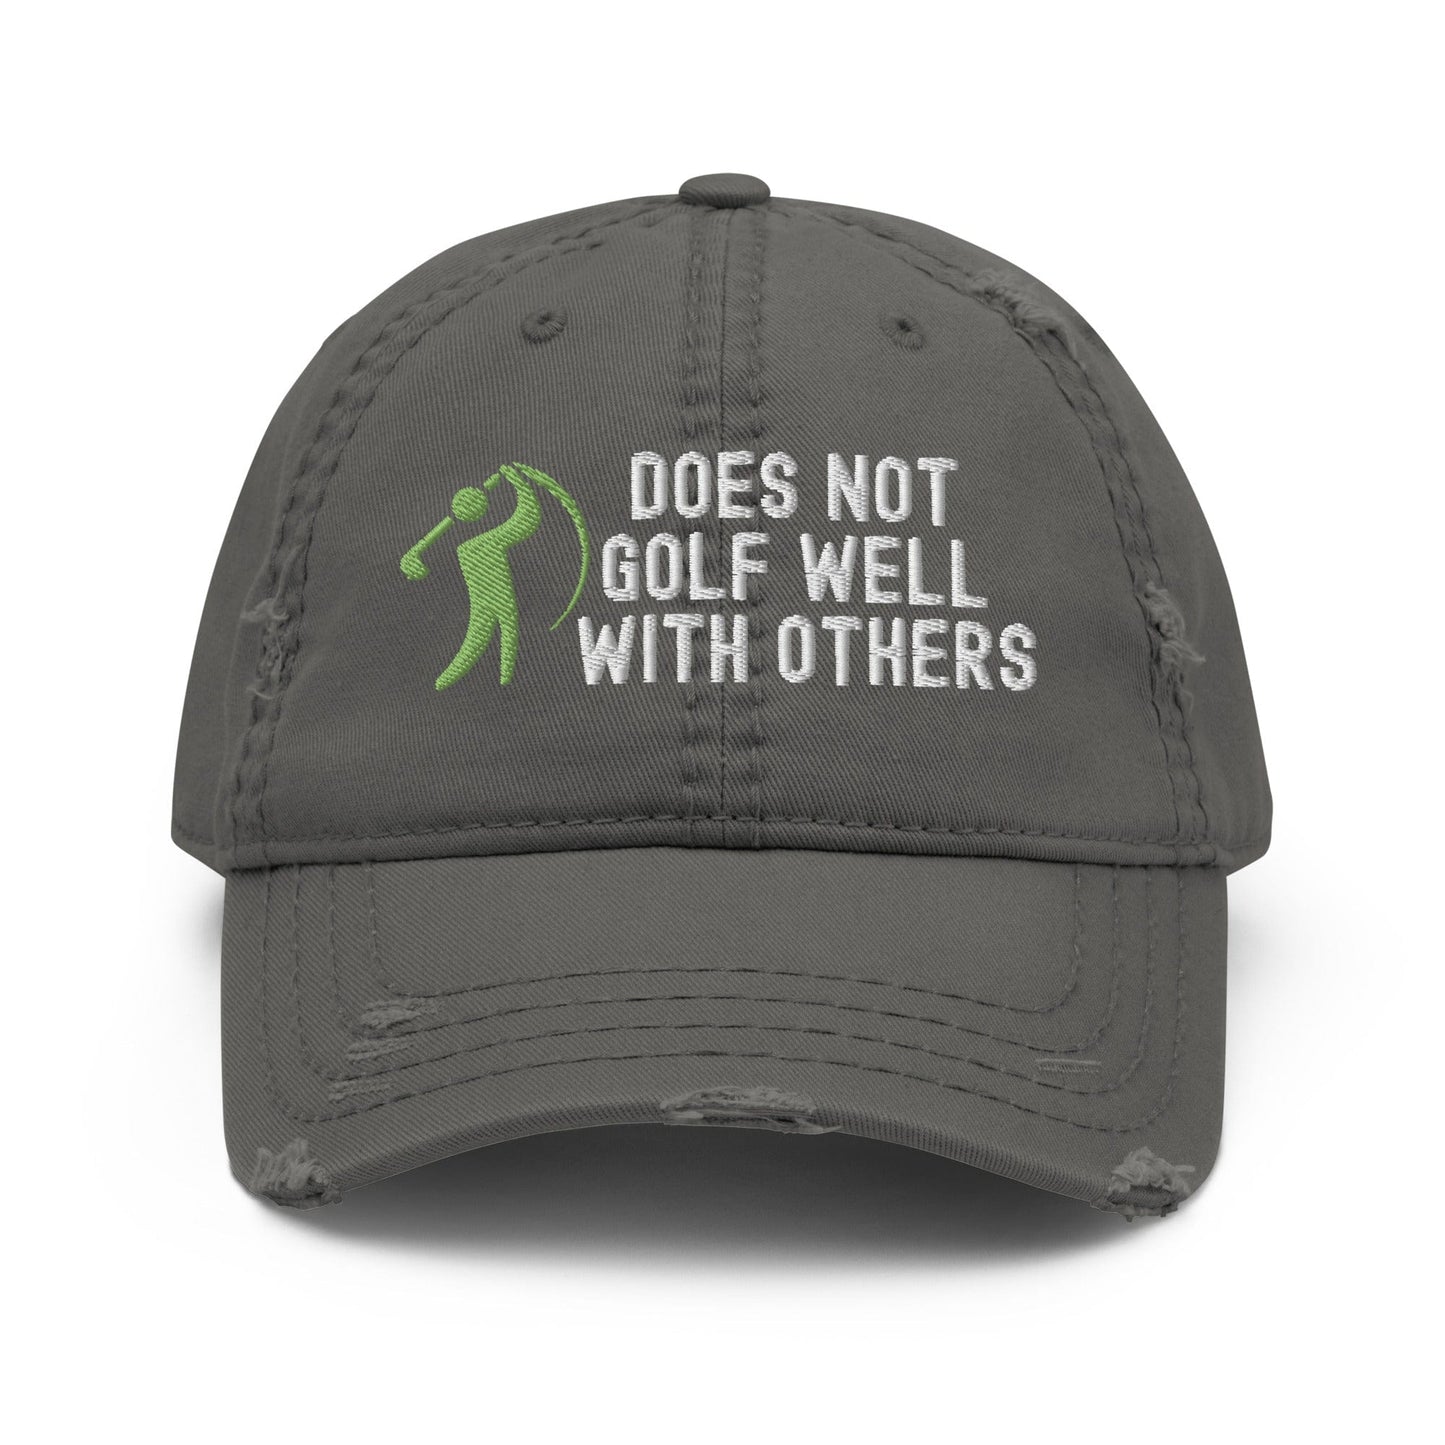 Funny Golfer Gifts  Distressed Cap Charcoal Grey Does Not Golf Well With Others Distressed Hat